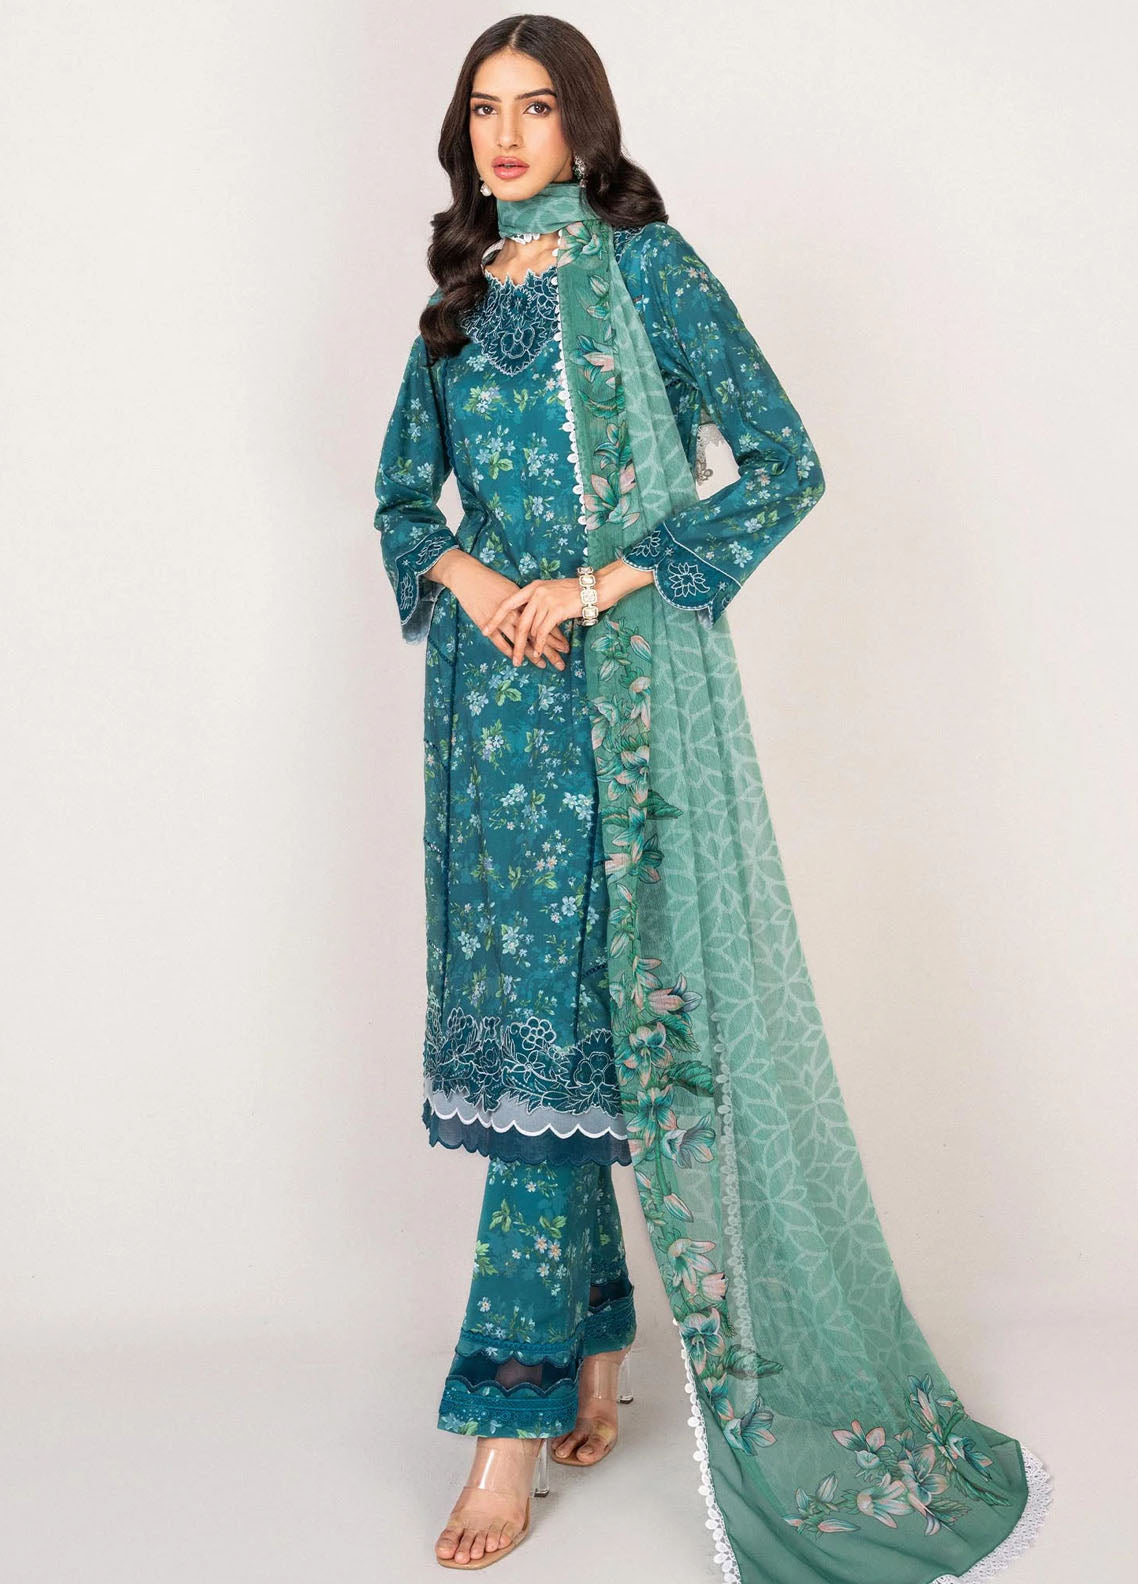 Serene By Shazme Unstitched Lawn Collection 2023 SH-06 Teal Bloom